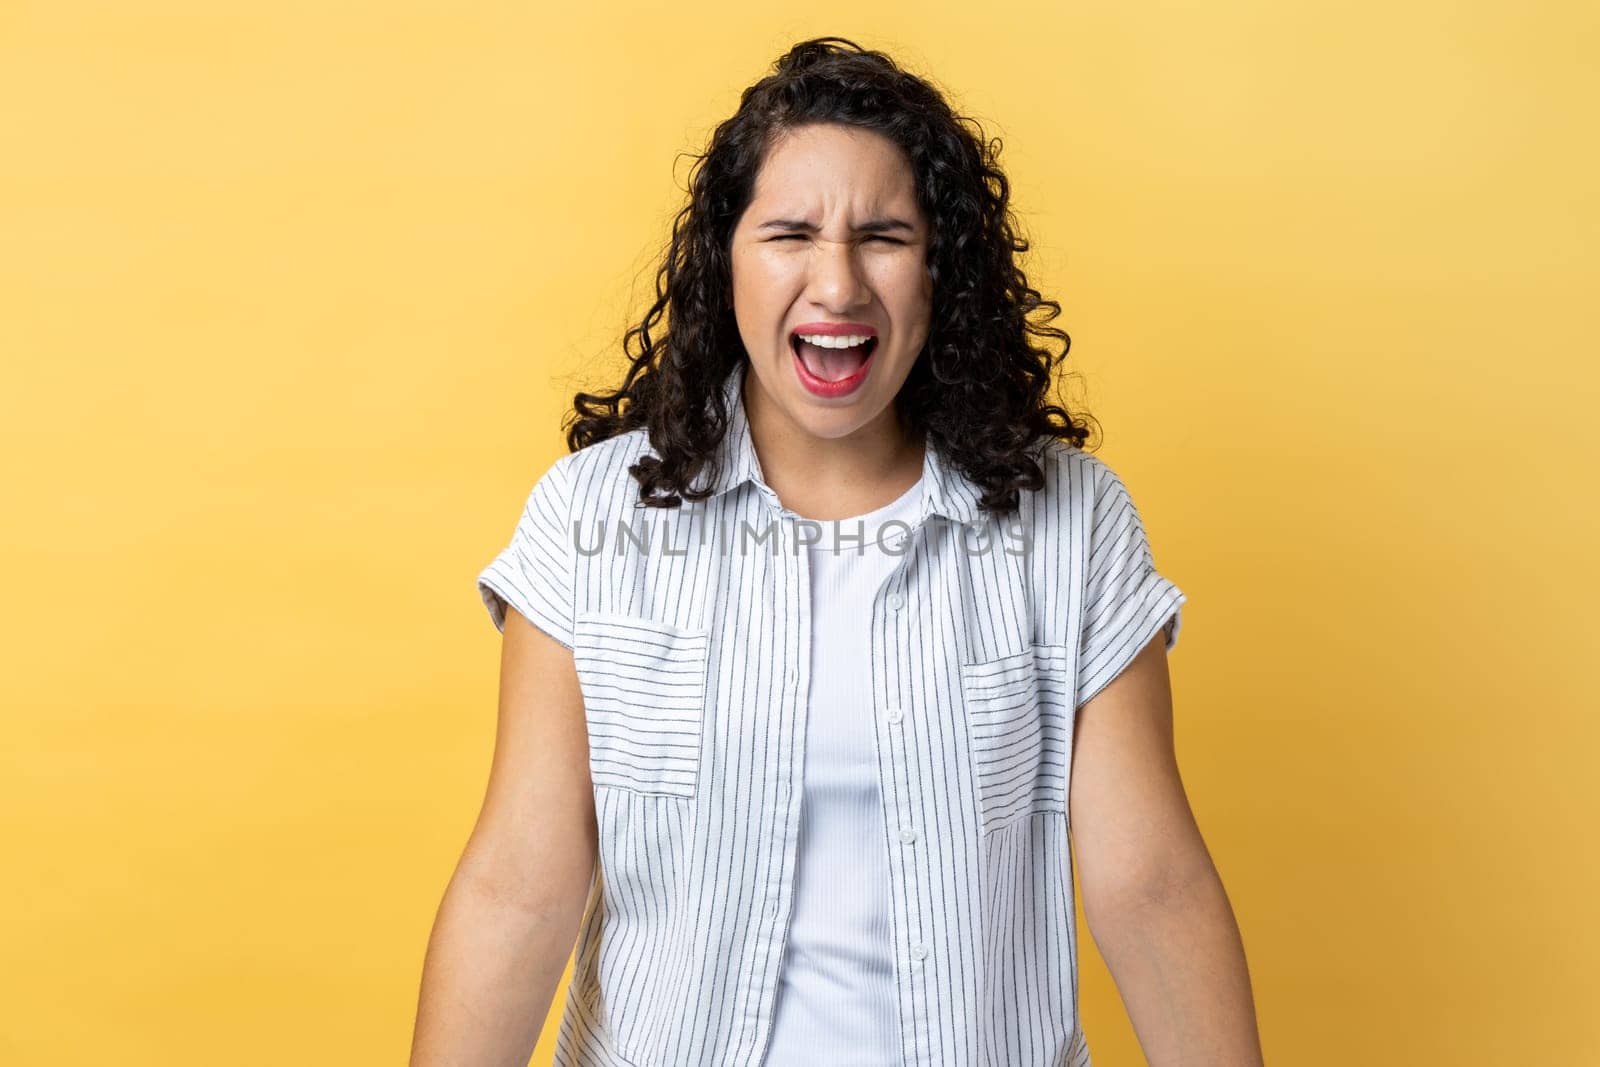 Portrait of angry aggressive young adult woman with dark wavy hair standing expressing aggression, screaming, frowning face. Indoor studio shot isolated on yellow background.